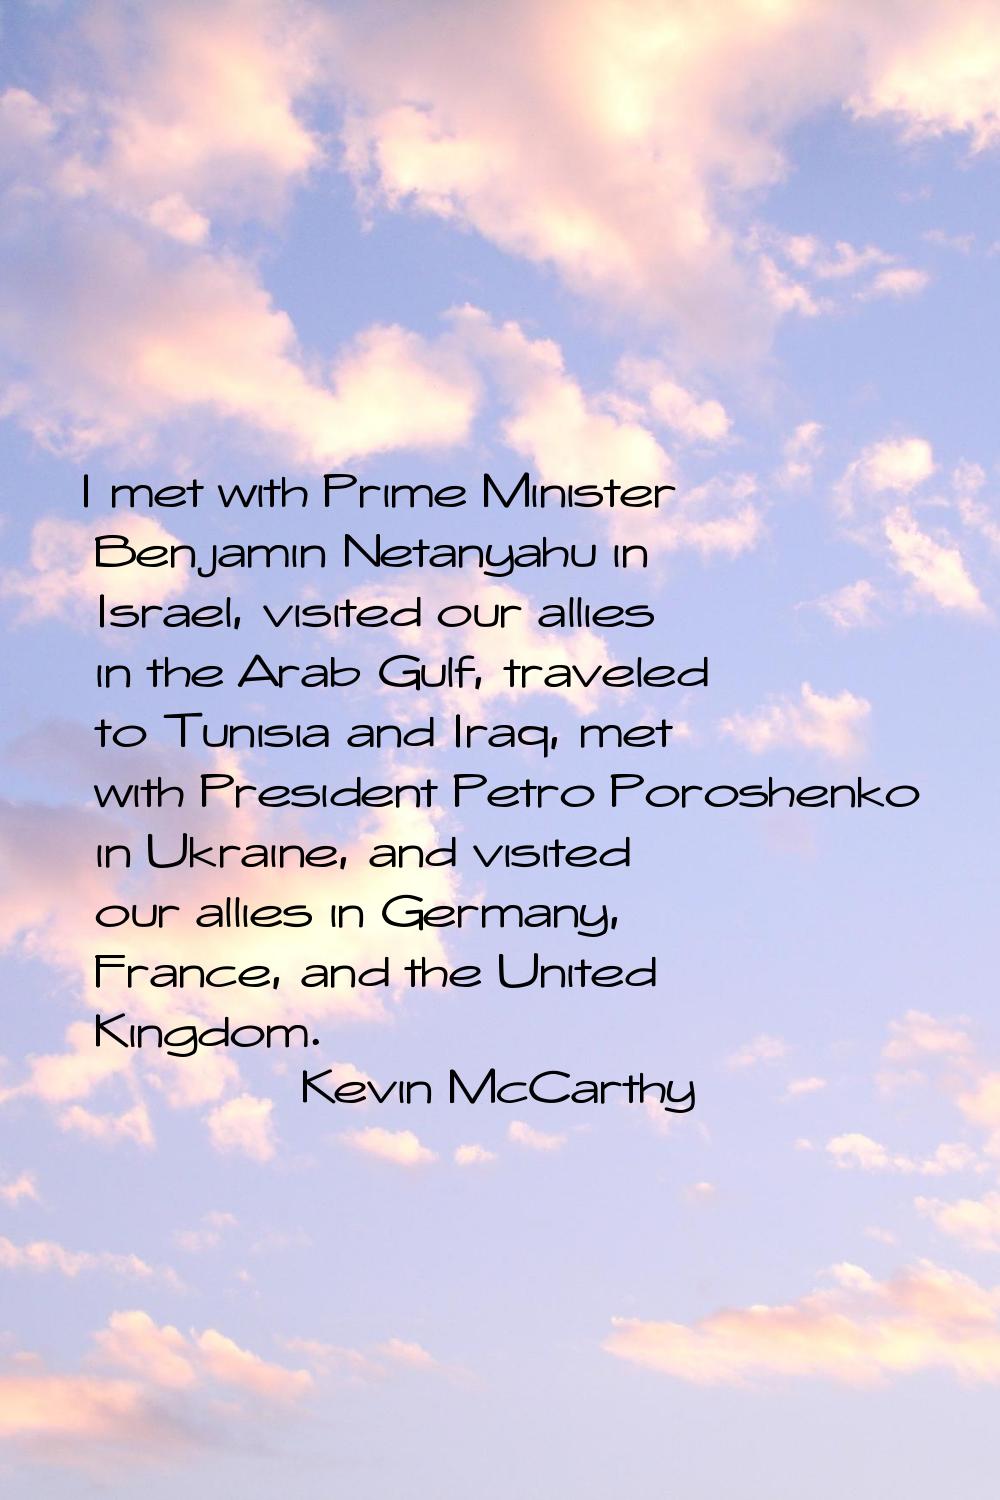 I met with Prime Minister Benjamin Netanyahu in Israel, visited our allies in the Arab Gulf, travel